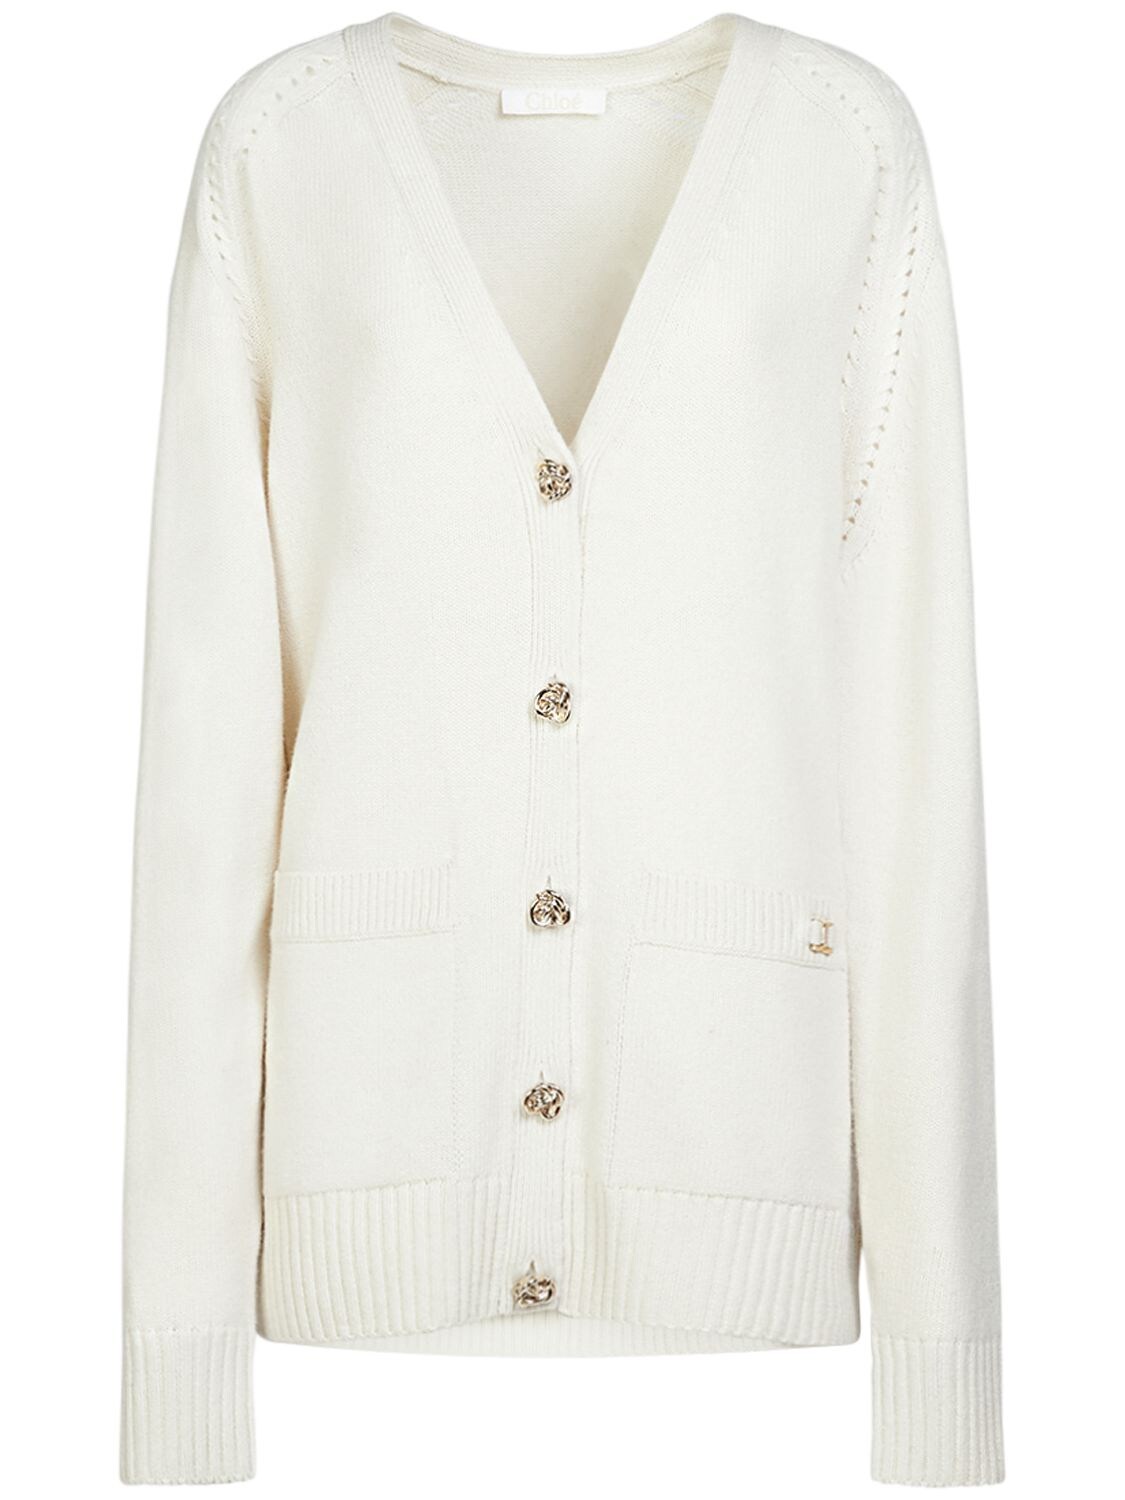 Chloé Embellished Cashmere Knit Cardigan In White